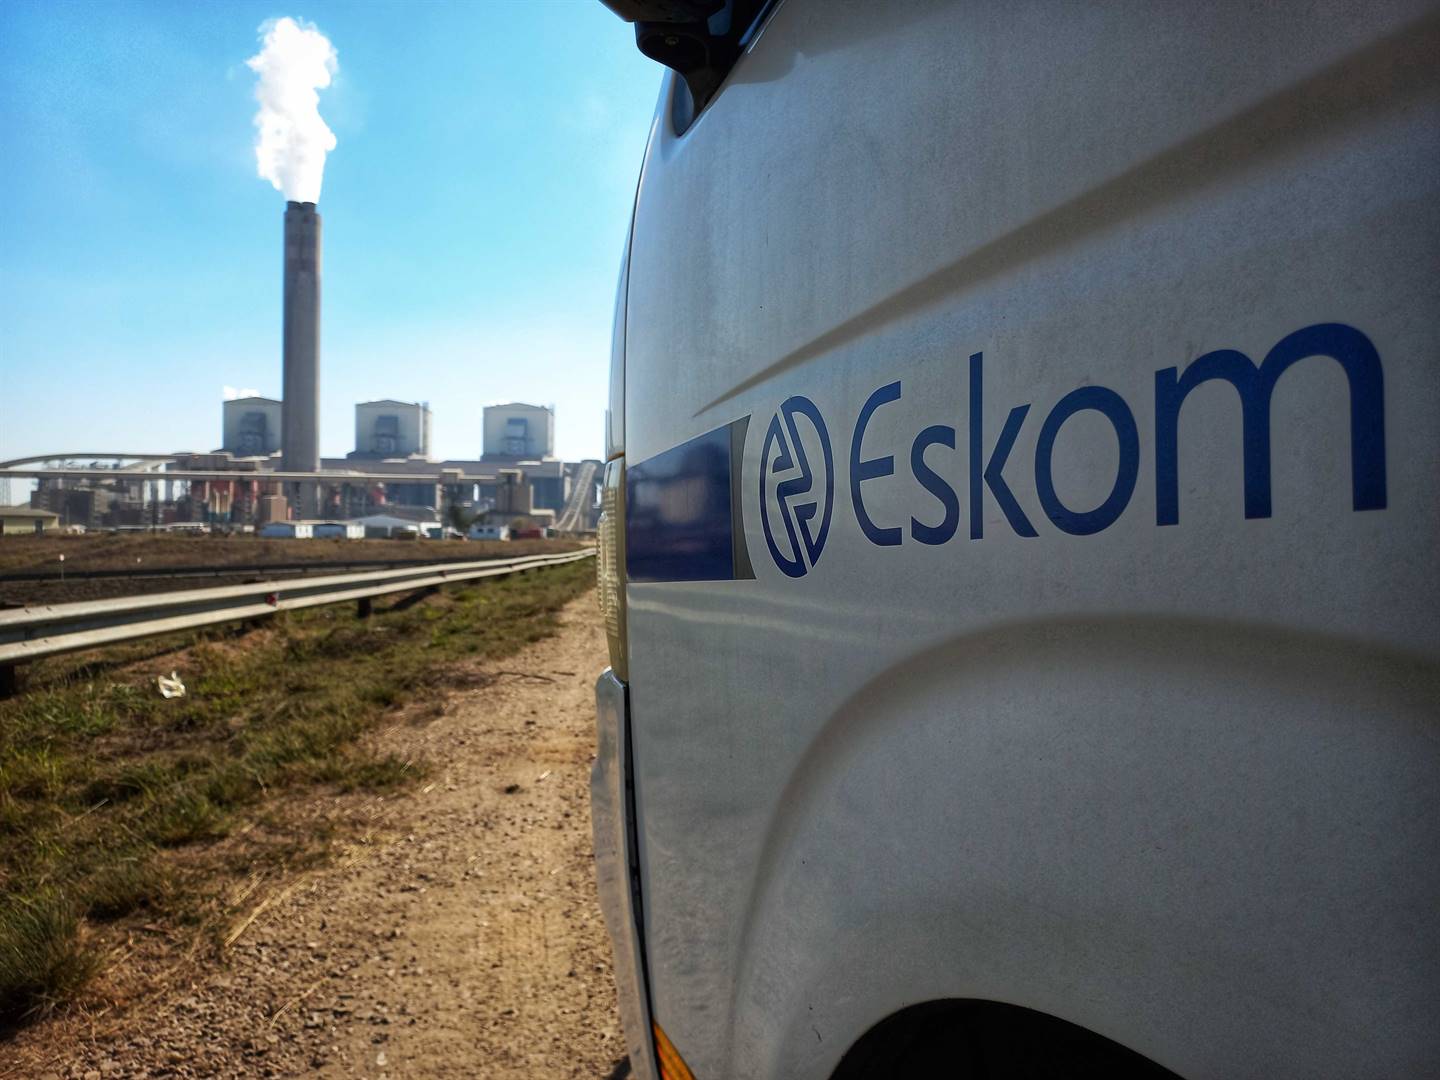 Eskom says the Fidelity Services security contract was in line with its procurement procedure and it followed the National Treasury directives for emergency procurements.